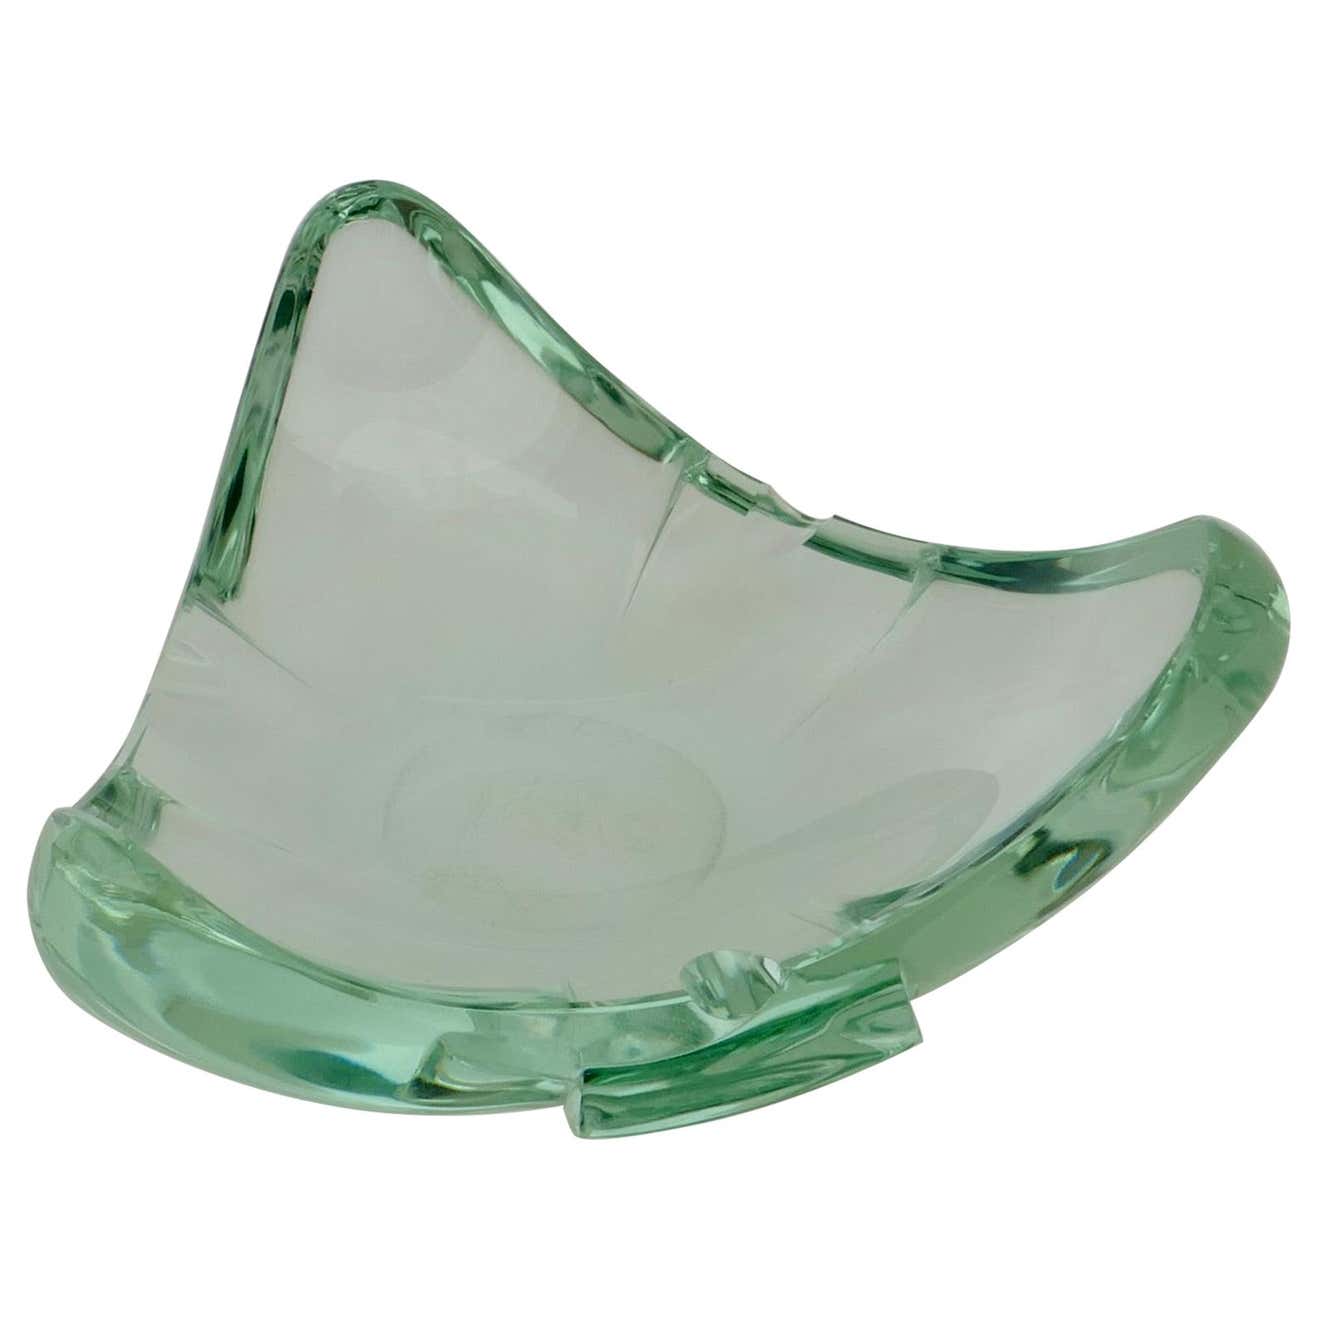 Sold - Beveled Glass Ashtray or Vide Poche, Italy 1960s, Attributed to Fontana Arte